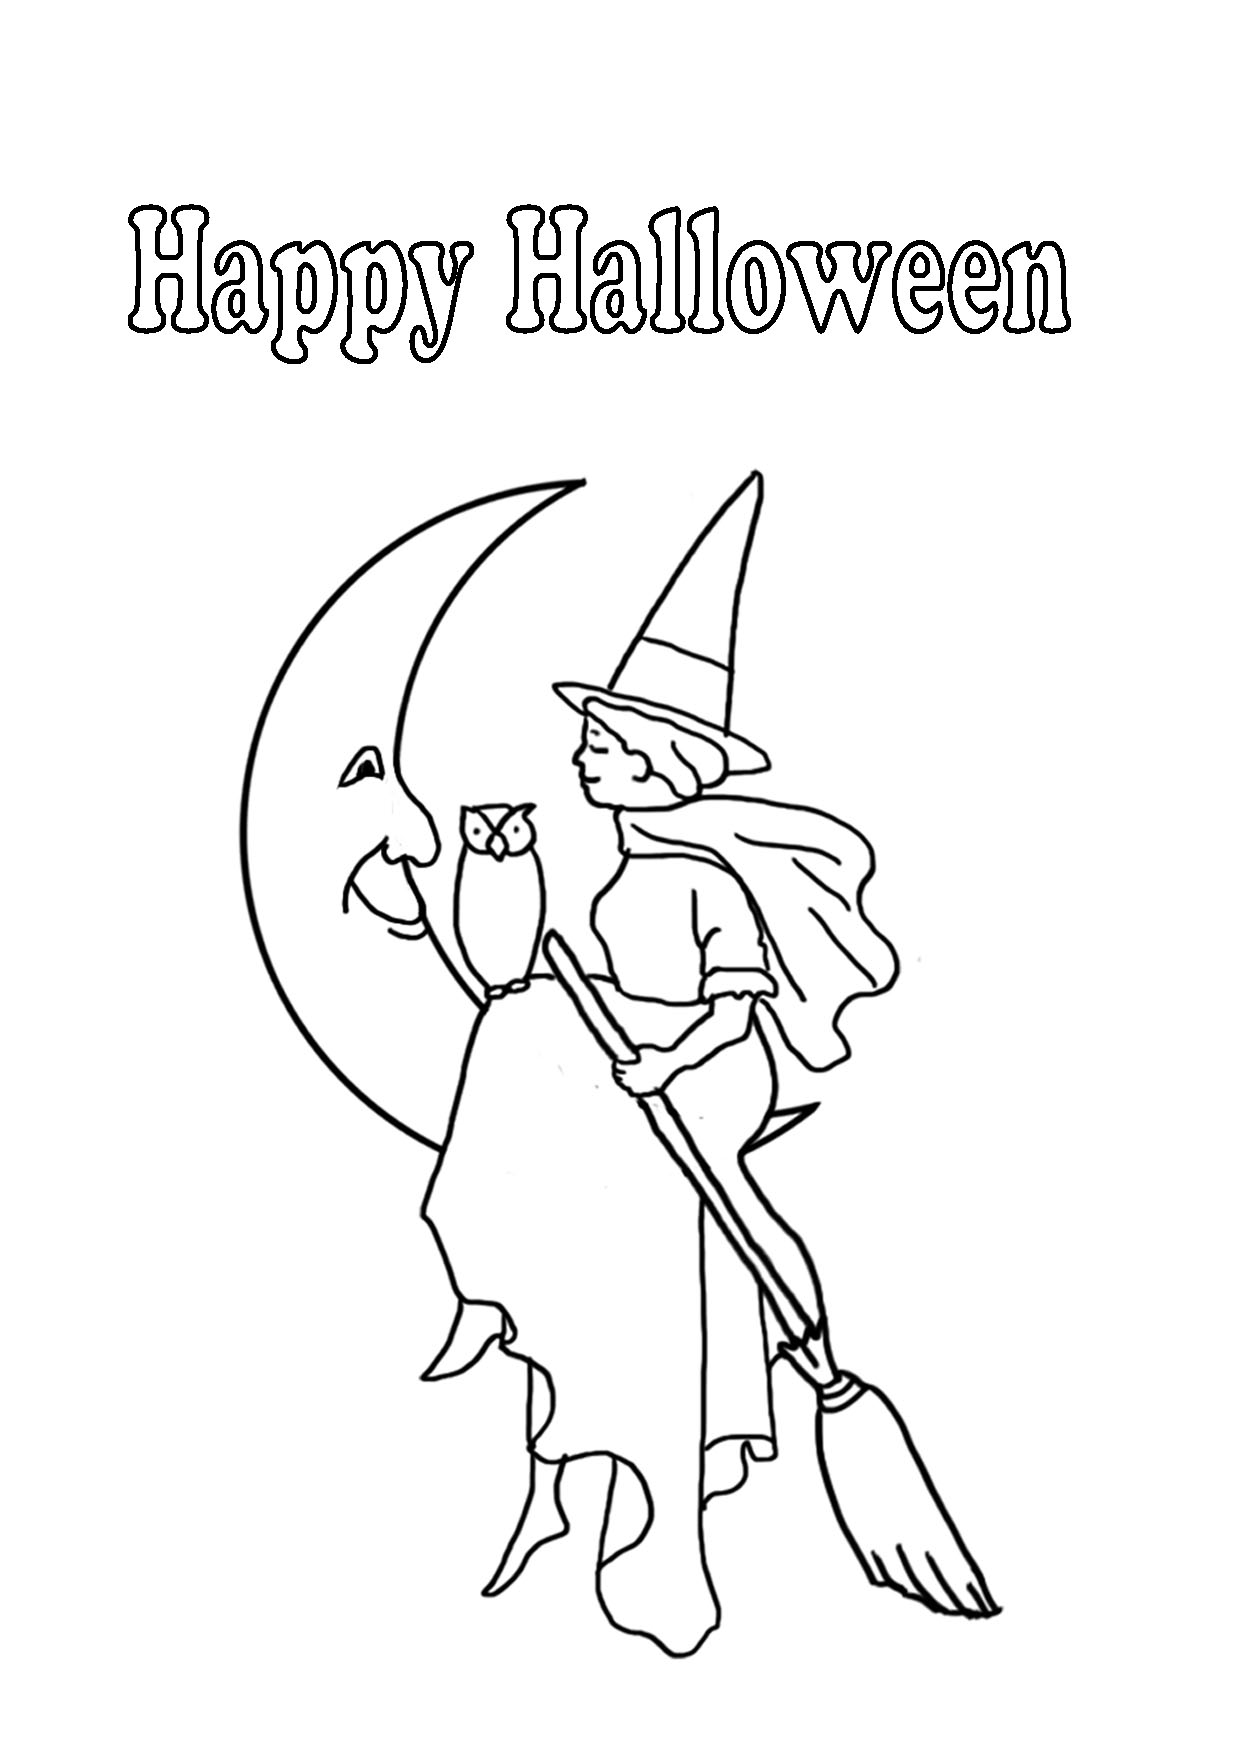 Halloween witch visiting the man in the moon